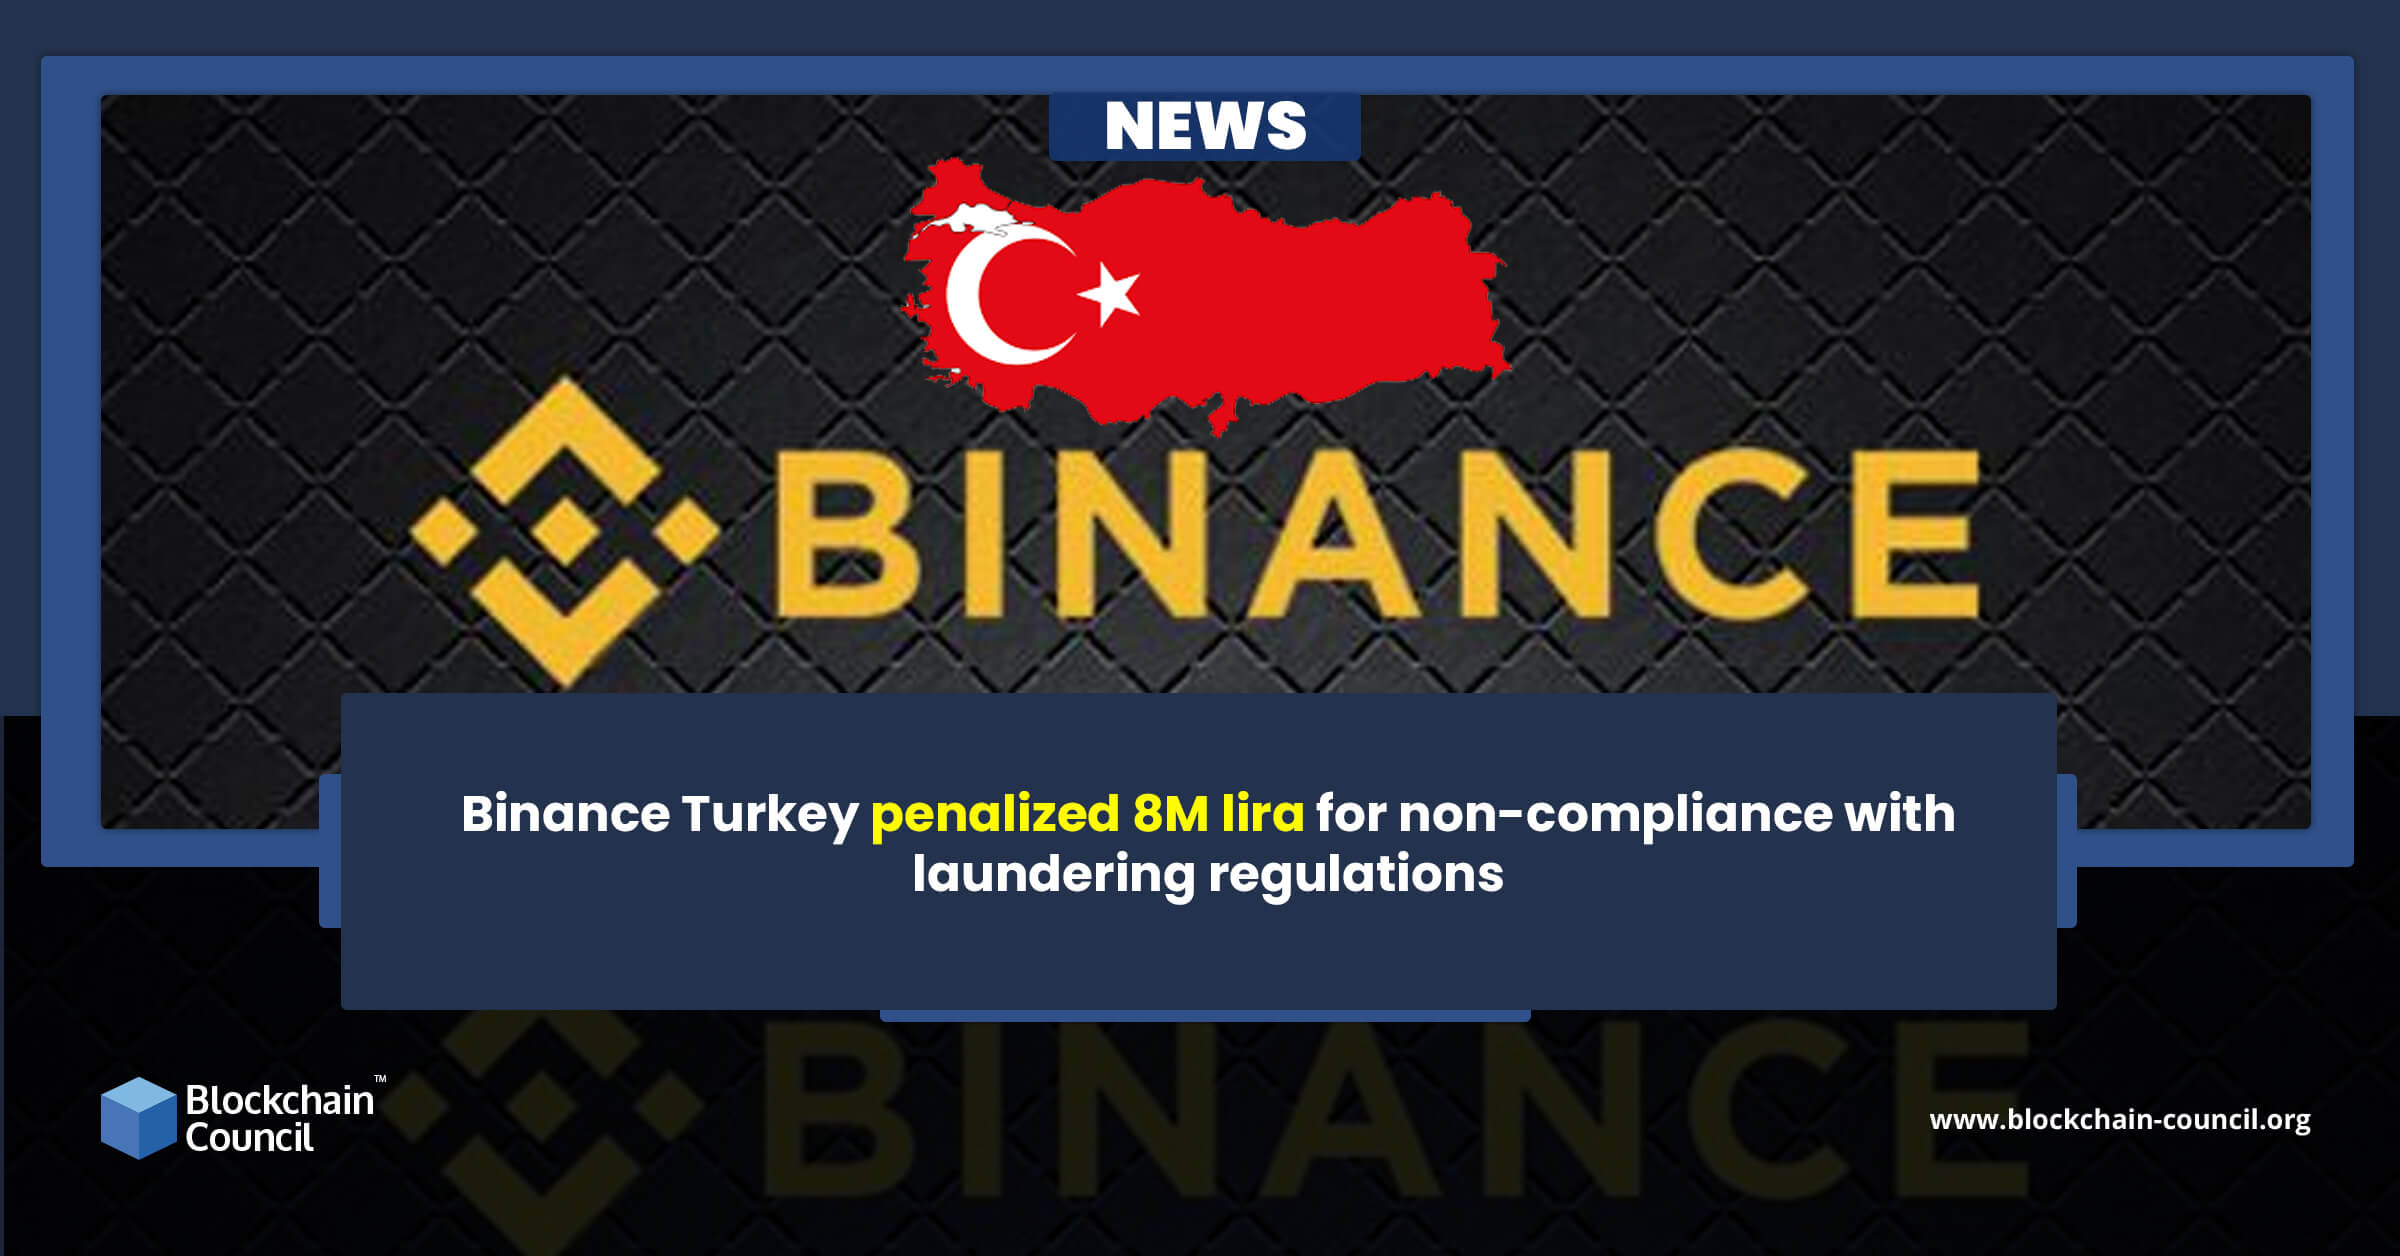 Binance Turkey penalized 8M lira for non-compliance with laundering regulations